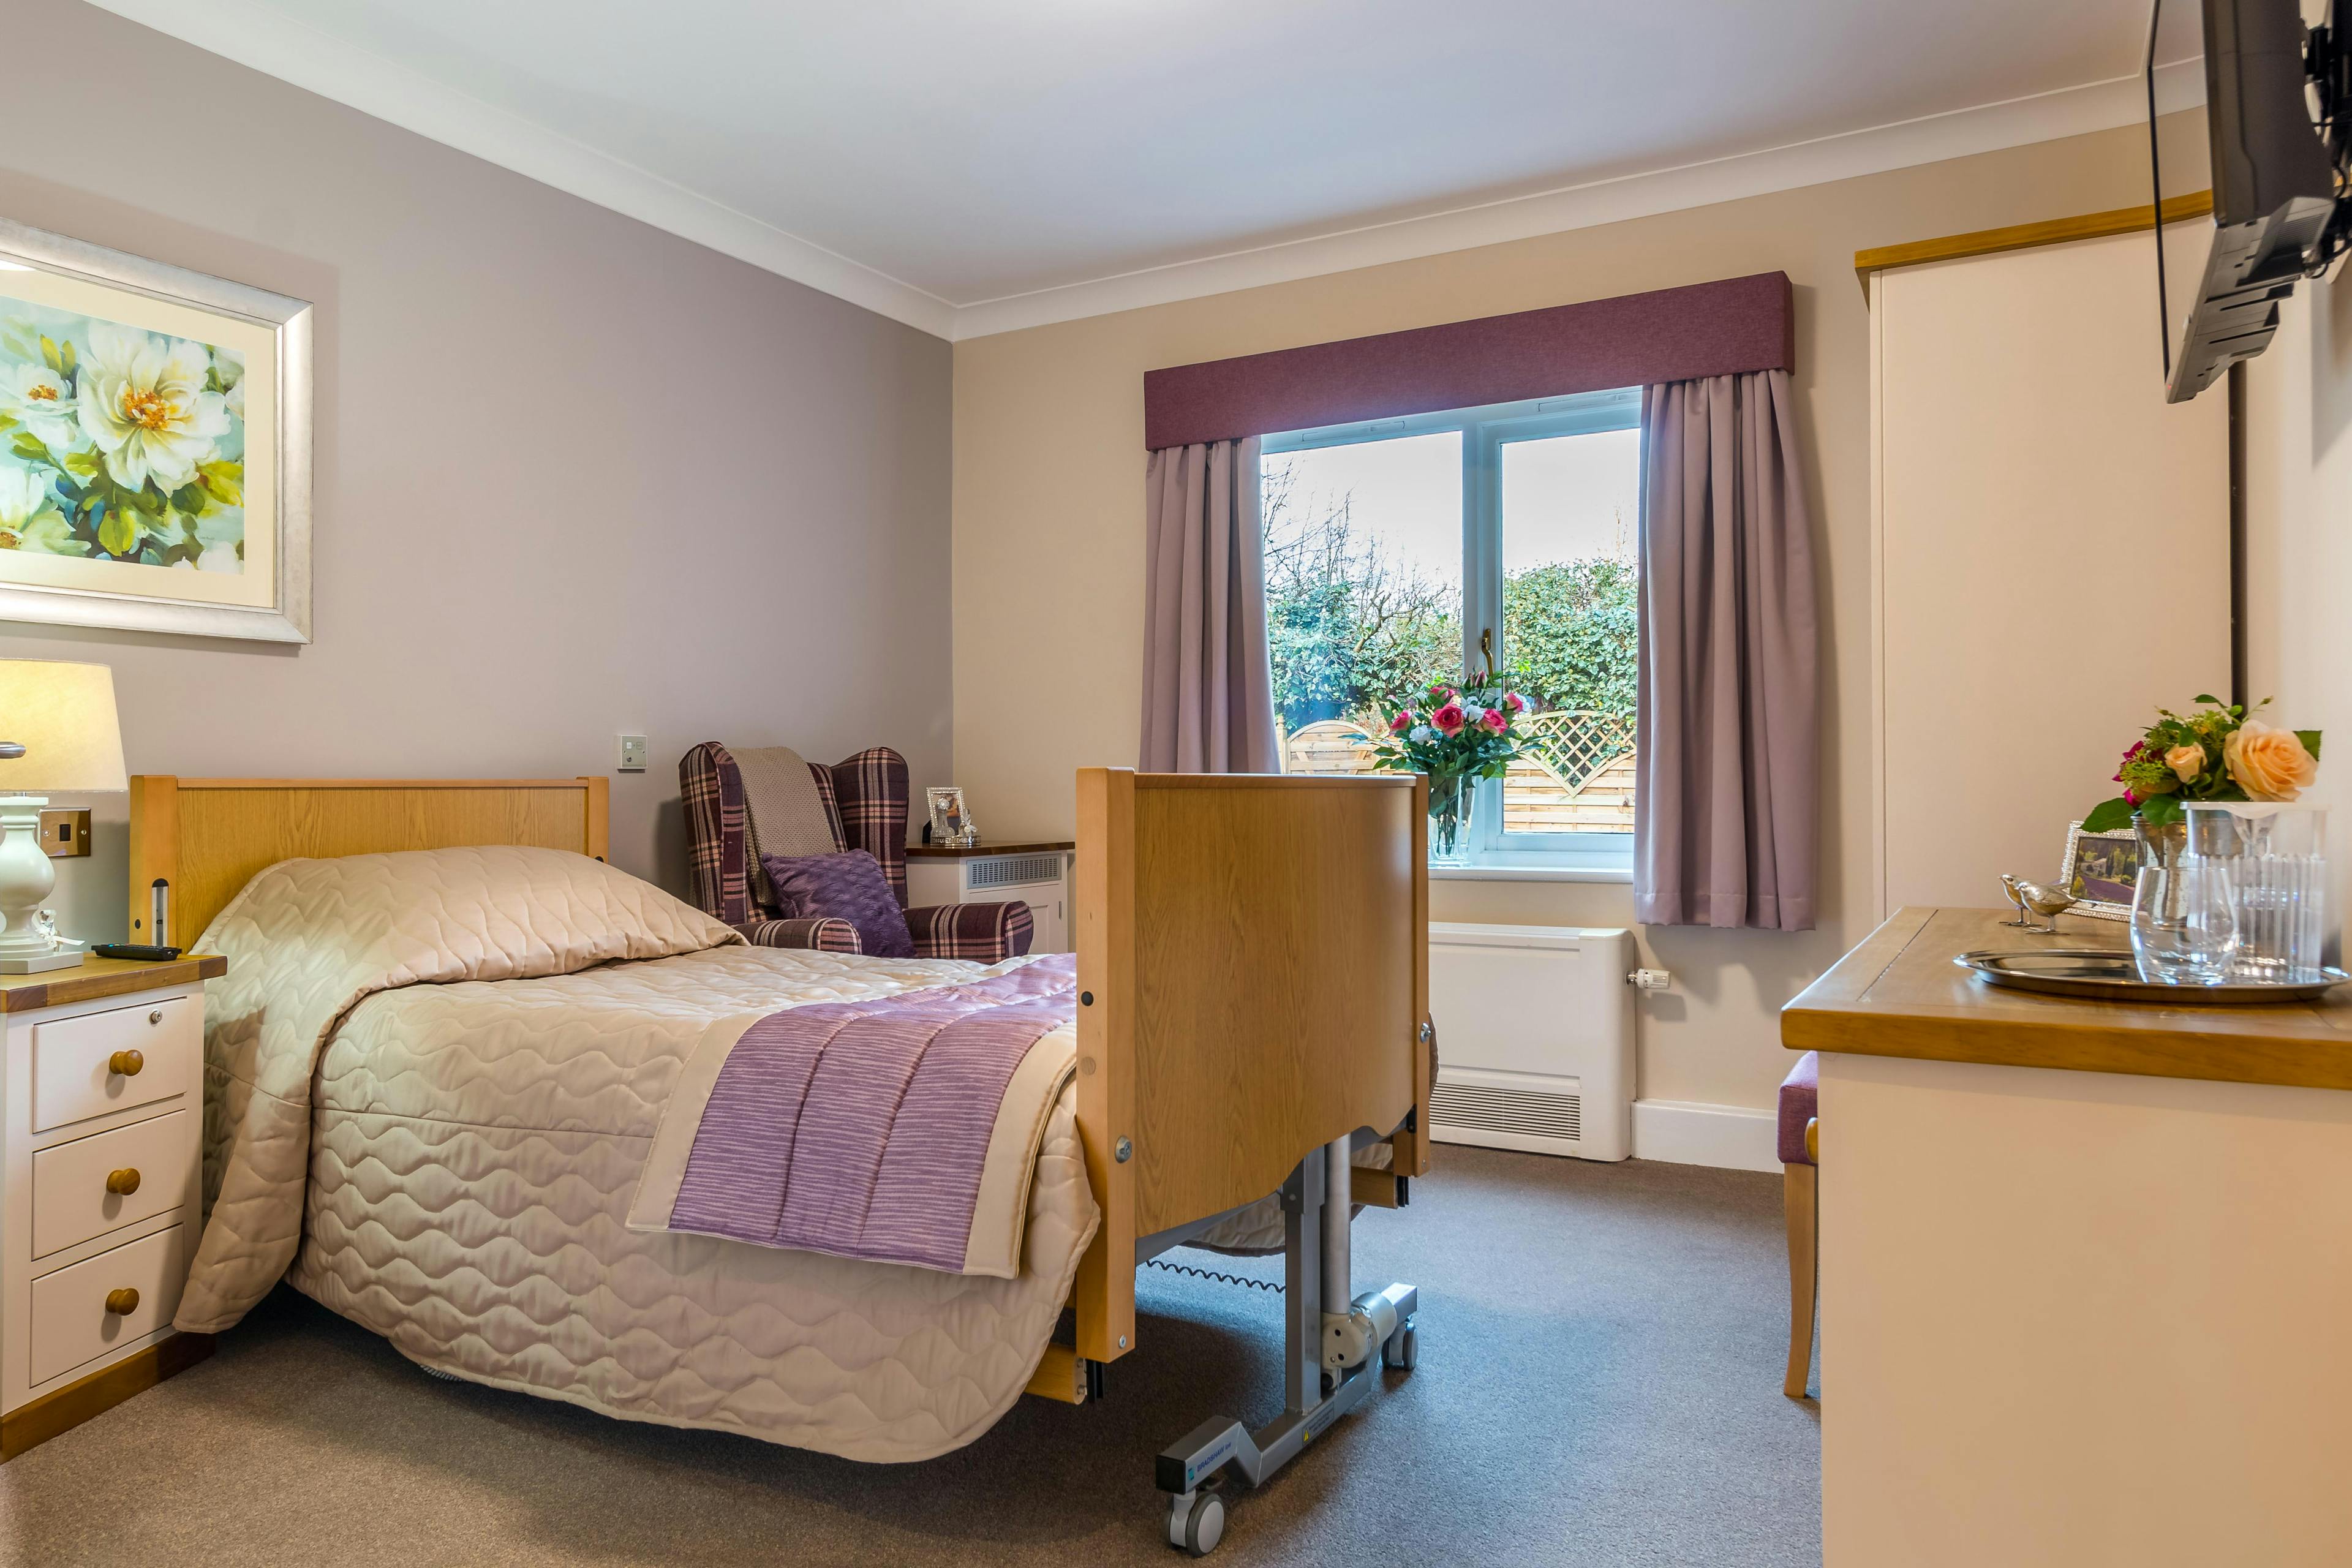 Bedroom at Overslade House Care Home in Rugby, Warwickshire